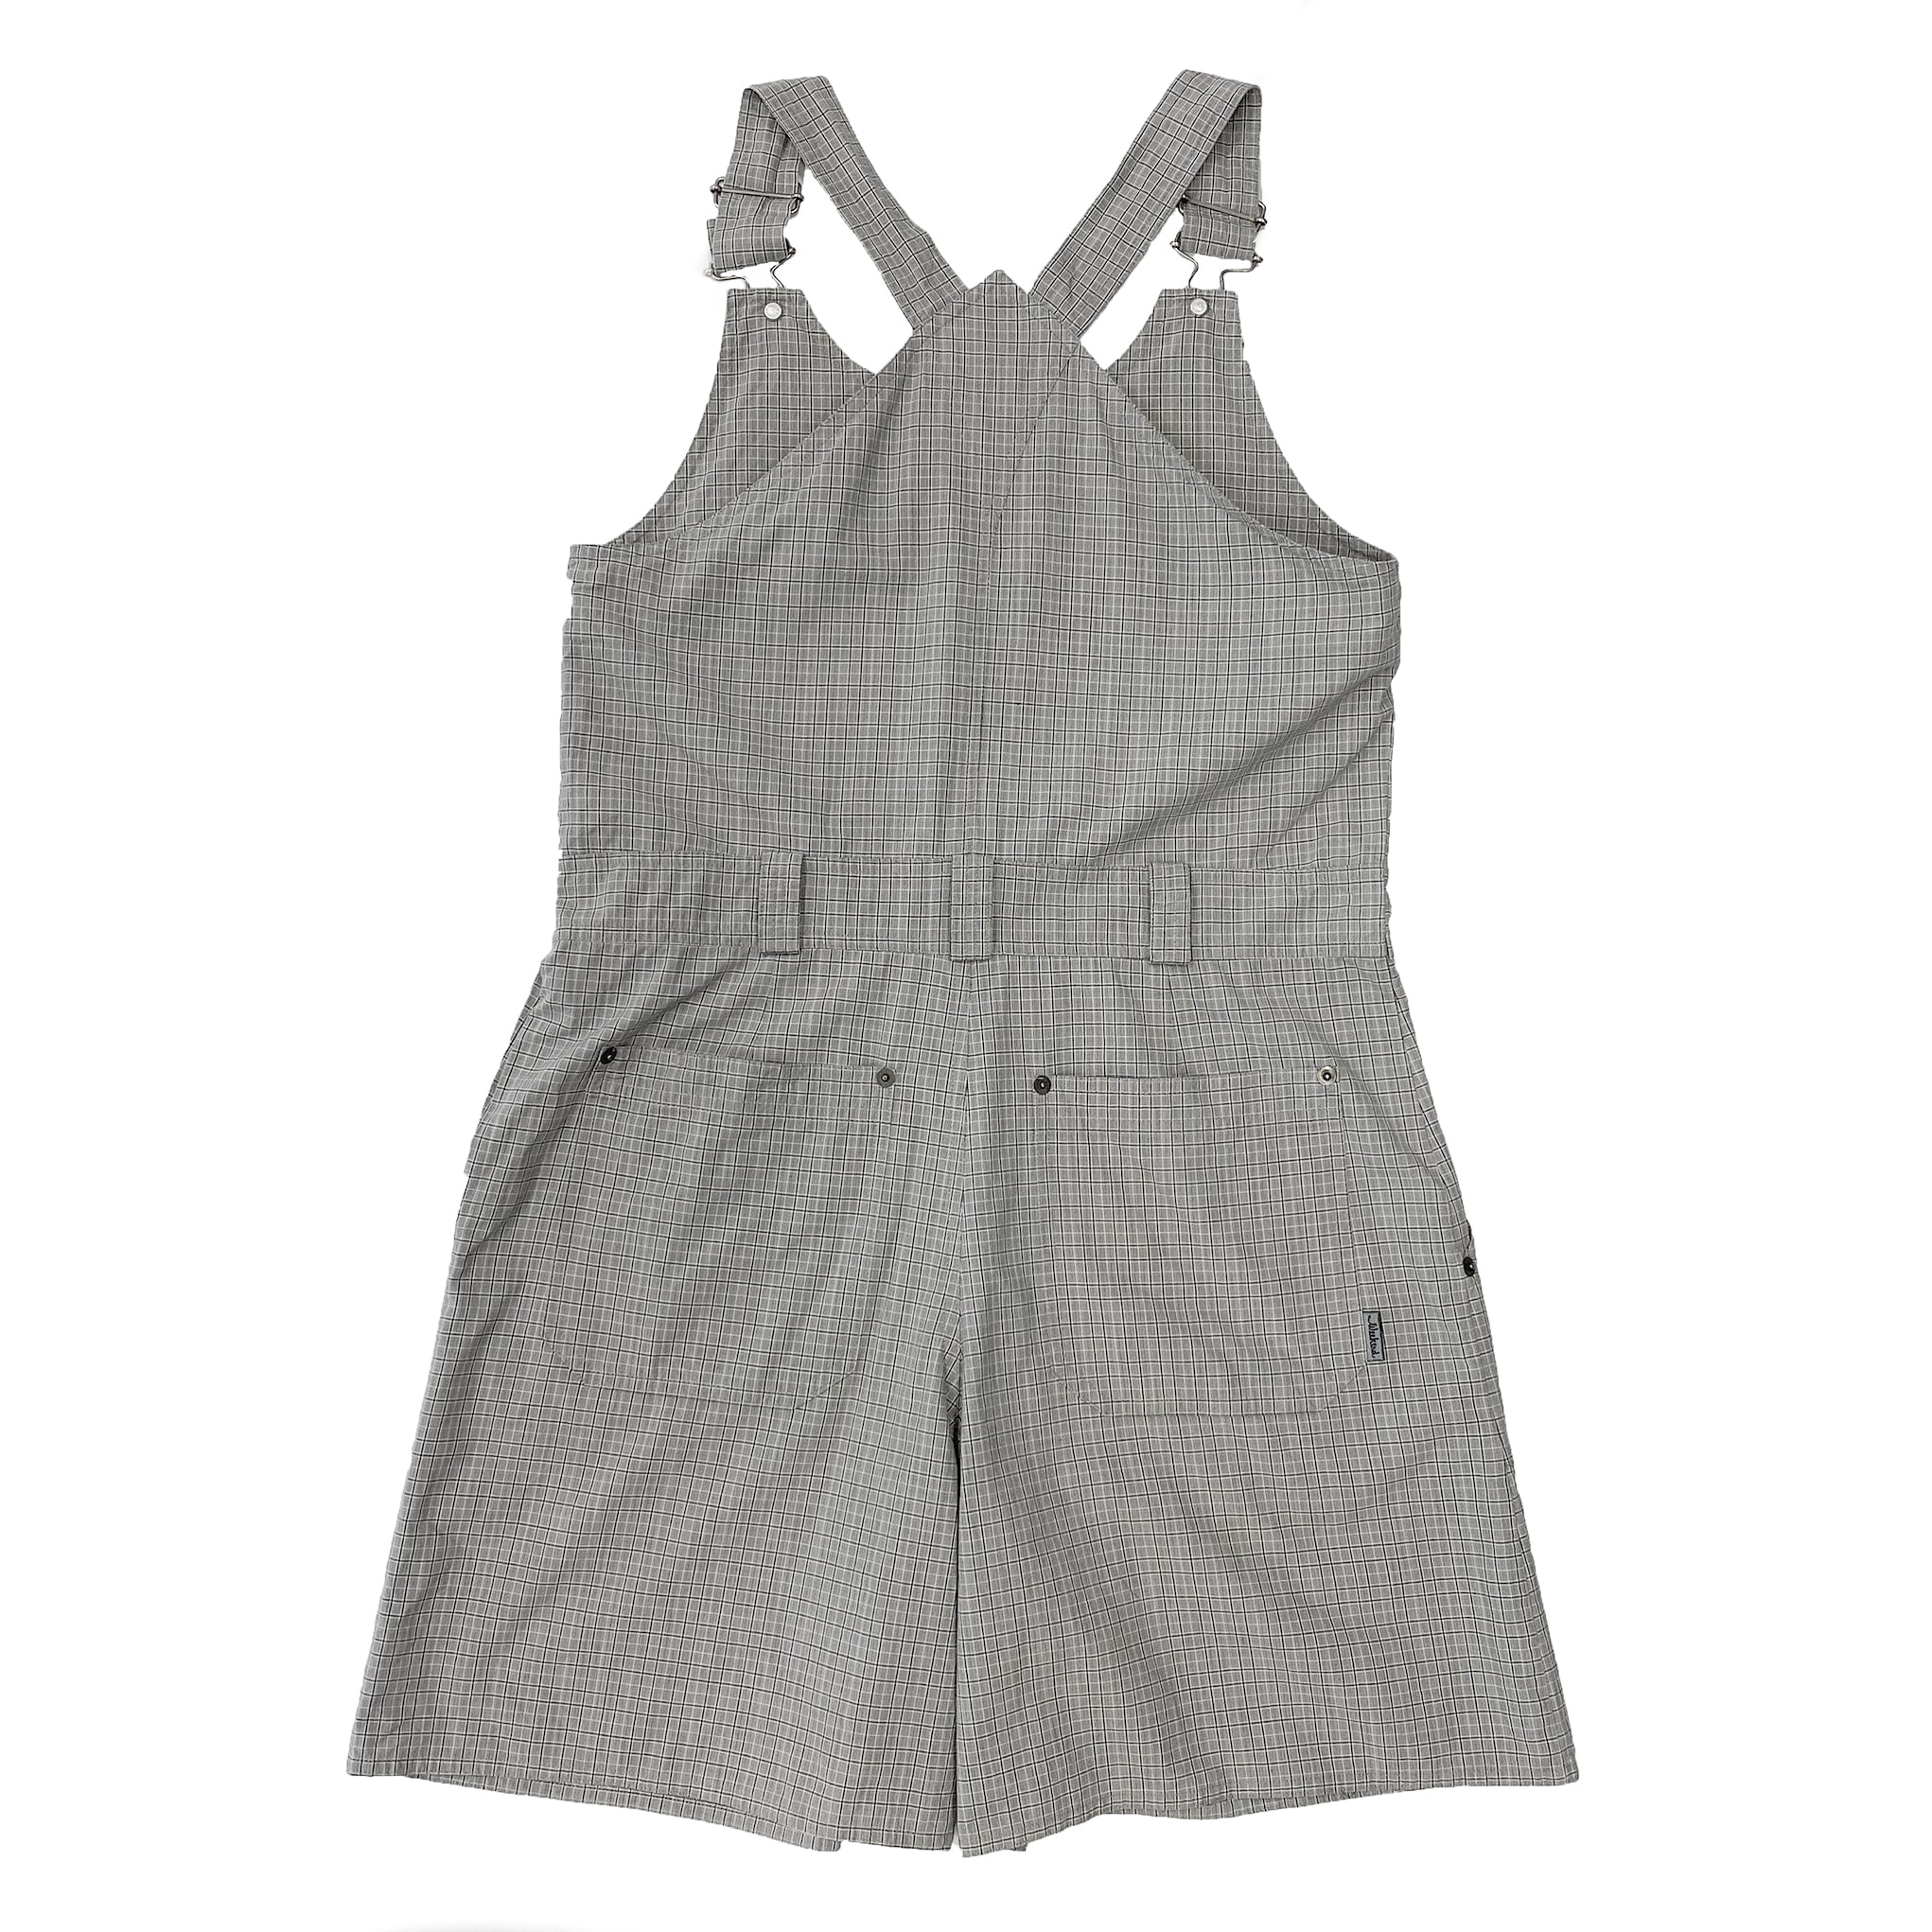 Weekend by MaxMara Checkered Gray Romper Jumpsuit